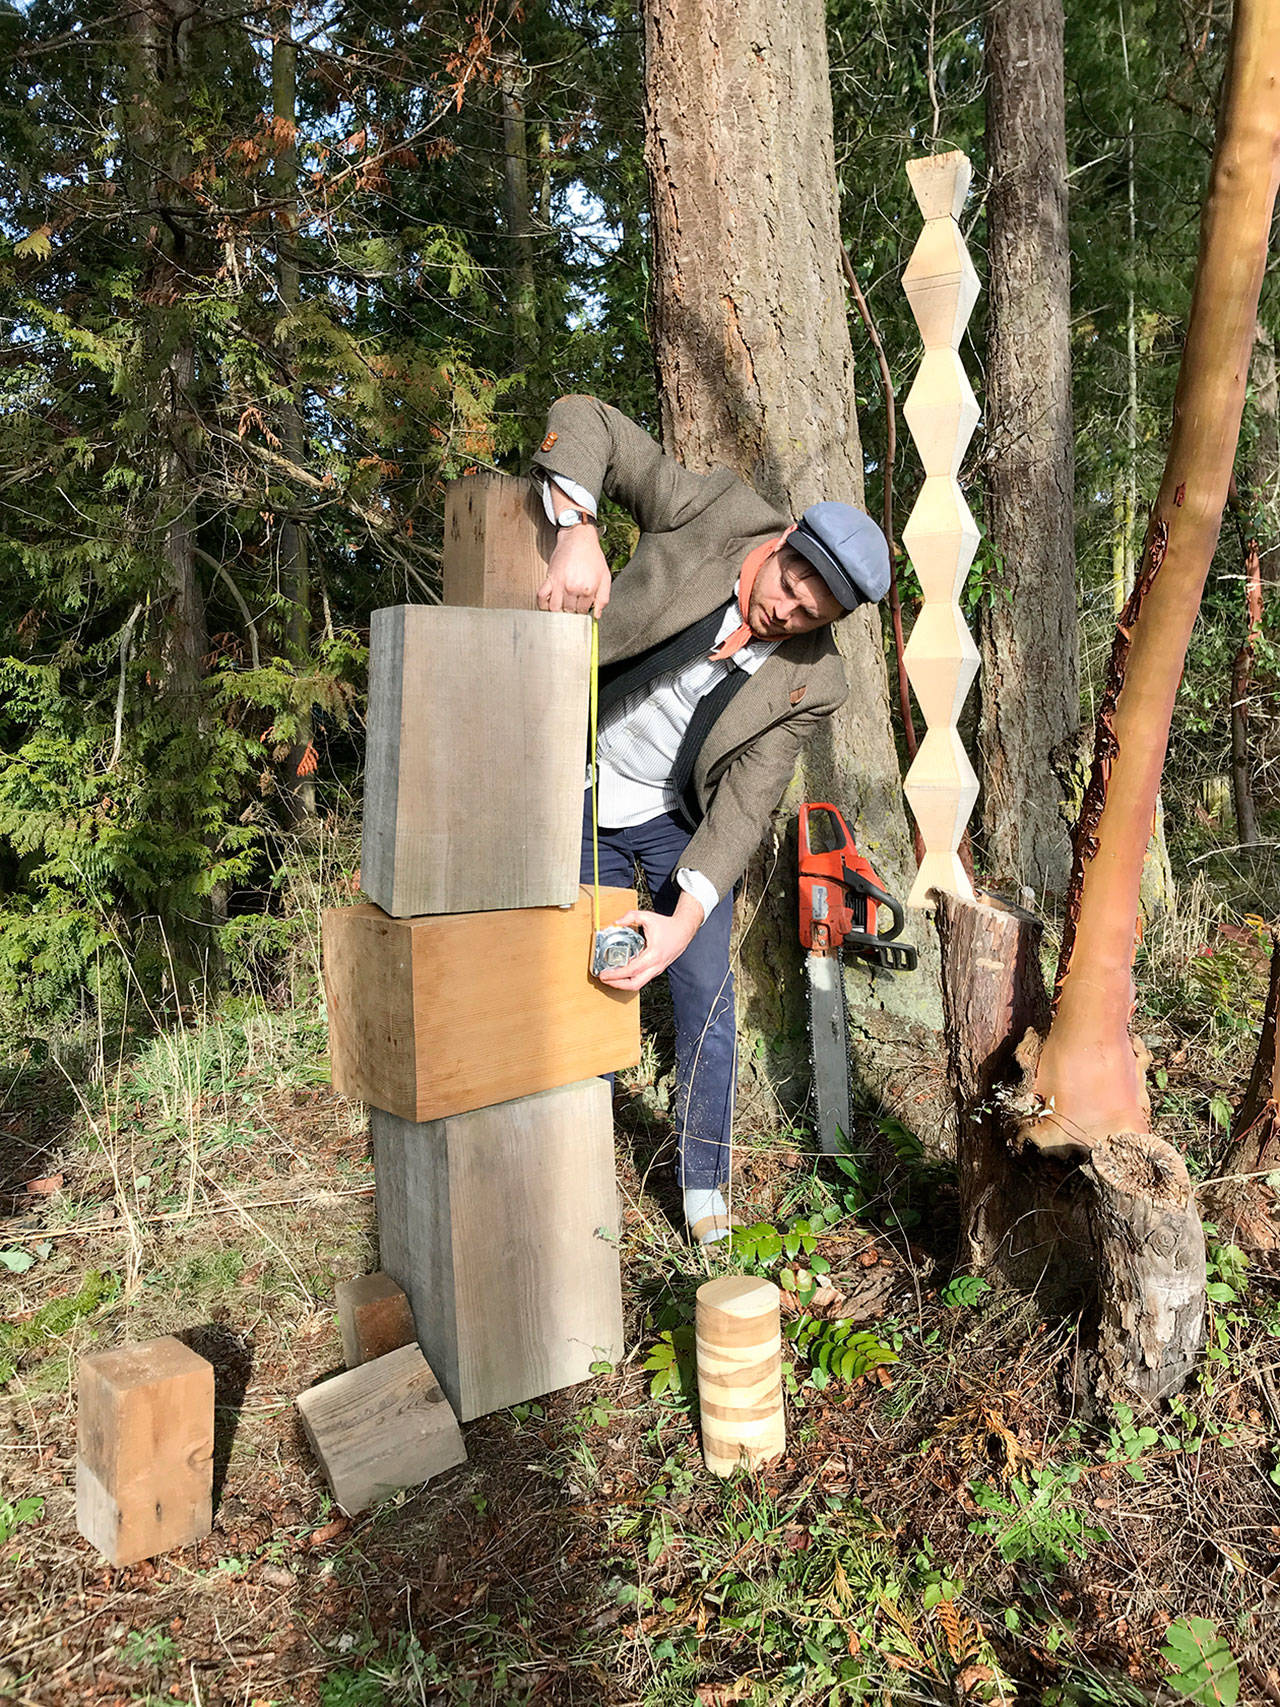 Jonah Trople of Port Townsend, working with wood outside his studio, has been chosen to create sculptural “art markers” for the city’s designated Creative District. (Port Townsend Main Street Program)